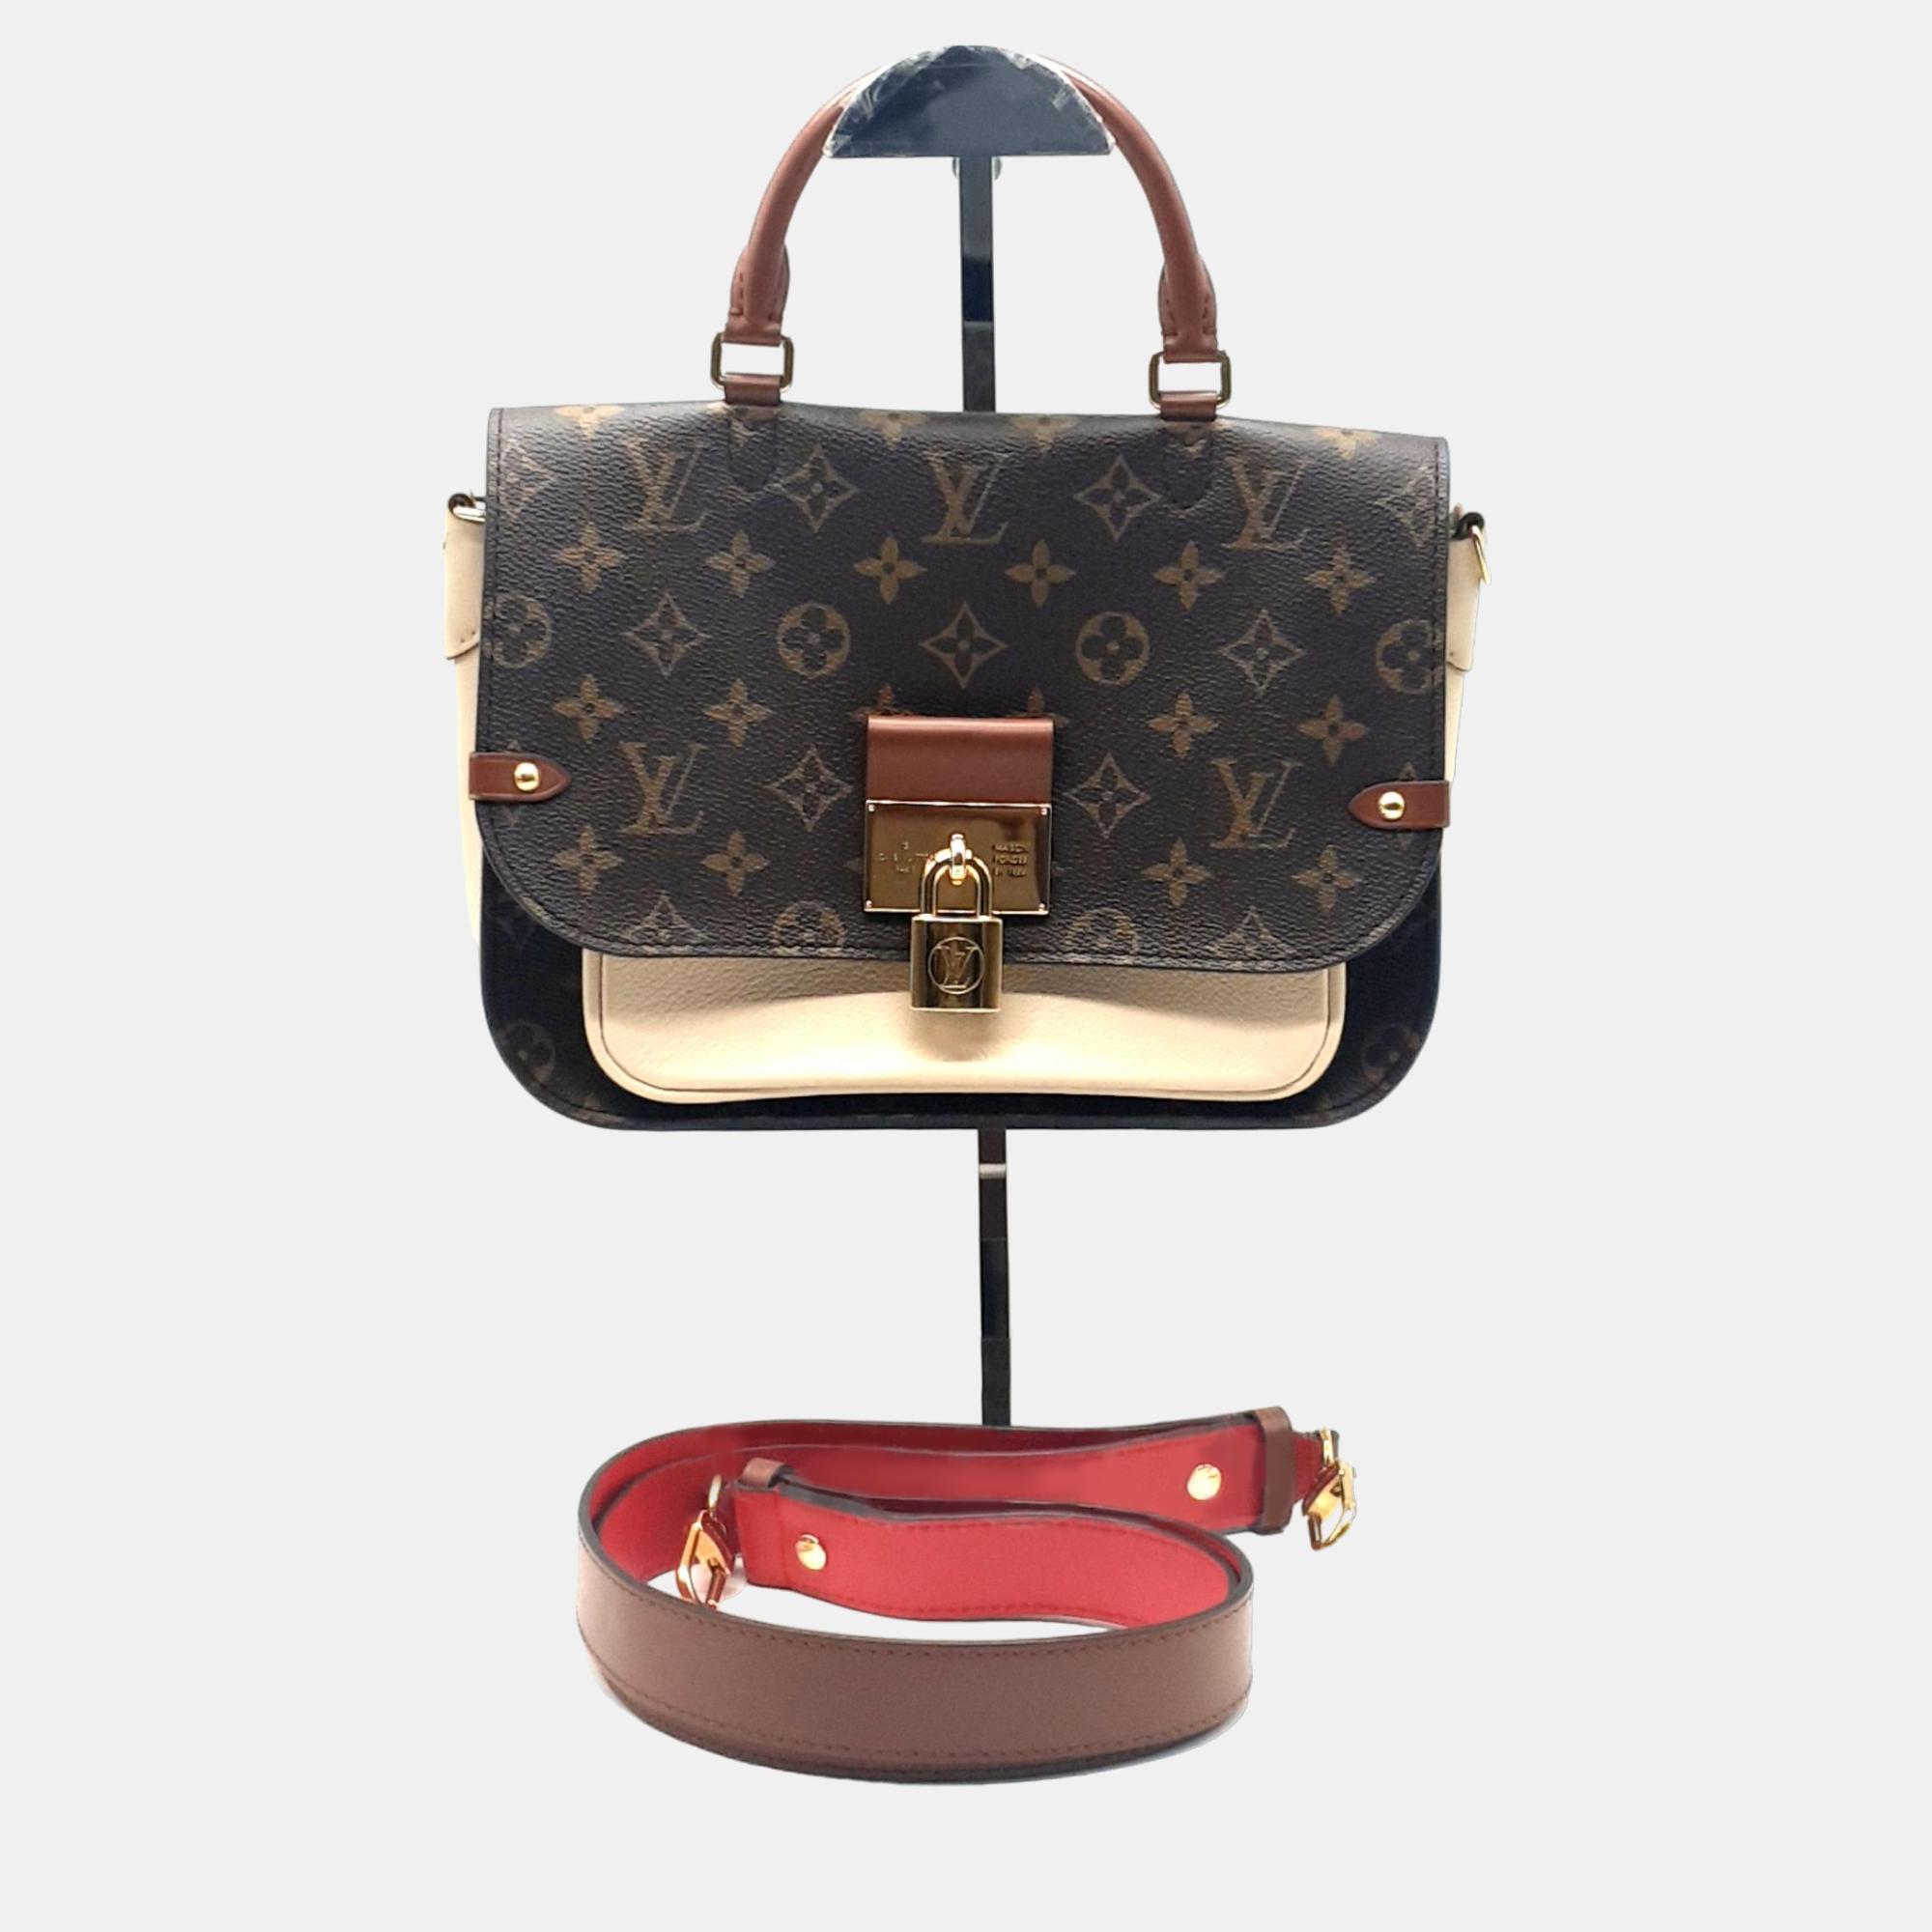 Vintage Louis Vuitton bags - Our luxury second-hand/pre-owned